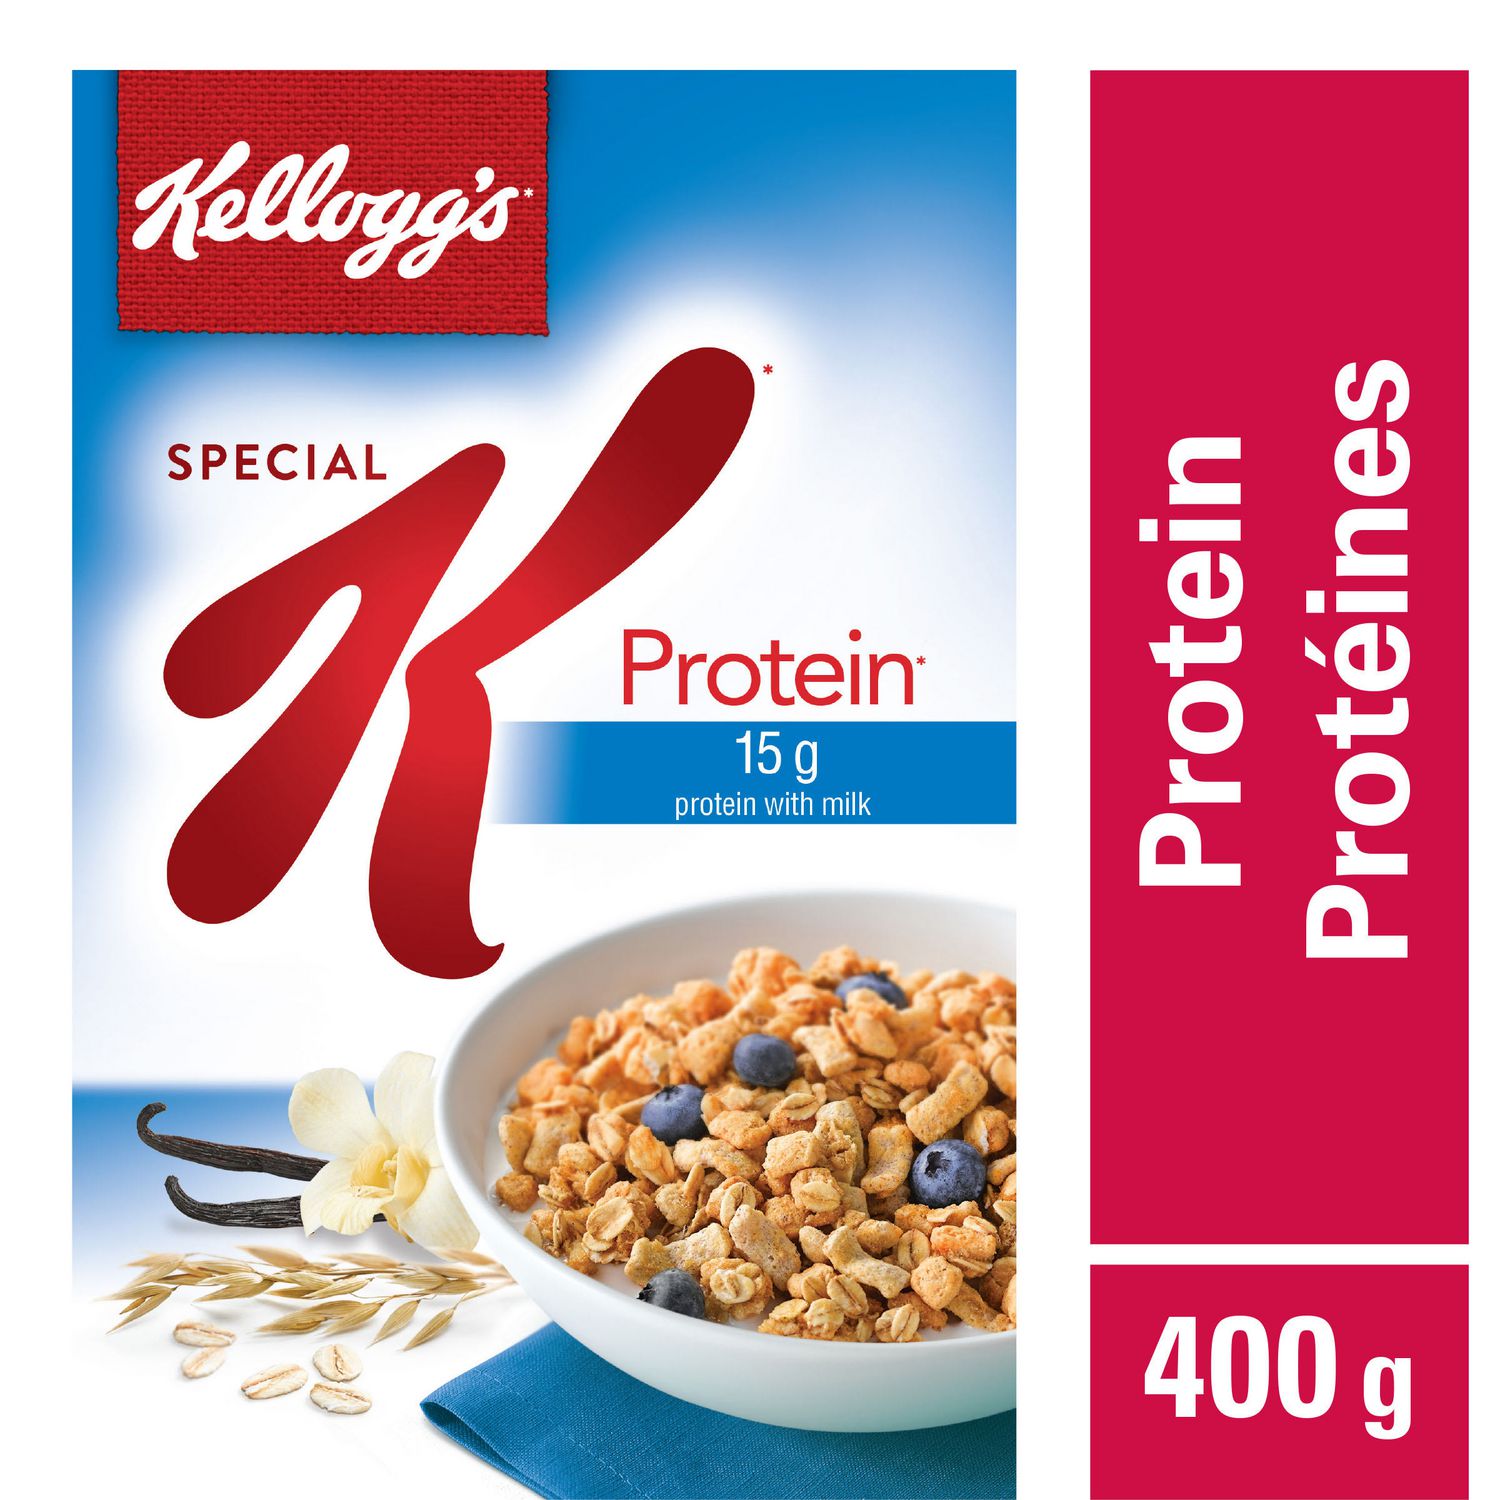 Kellogg's Special K Protein Cereal, 400g | Walmart Canada